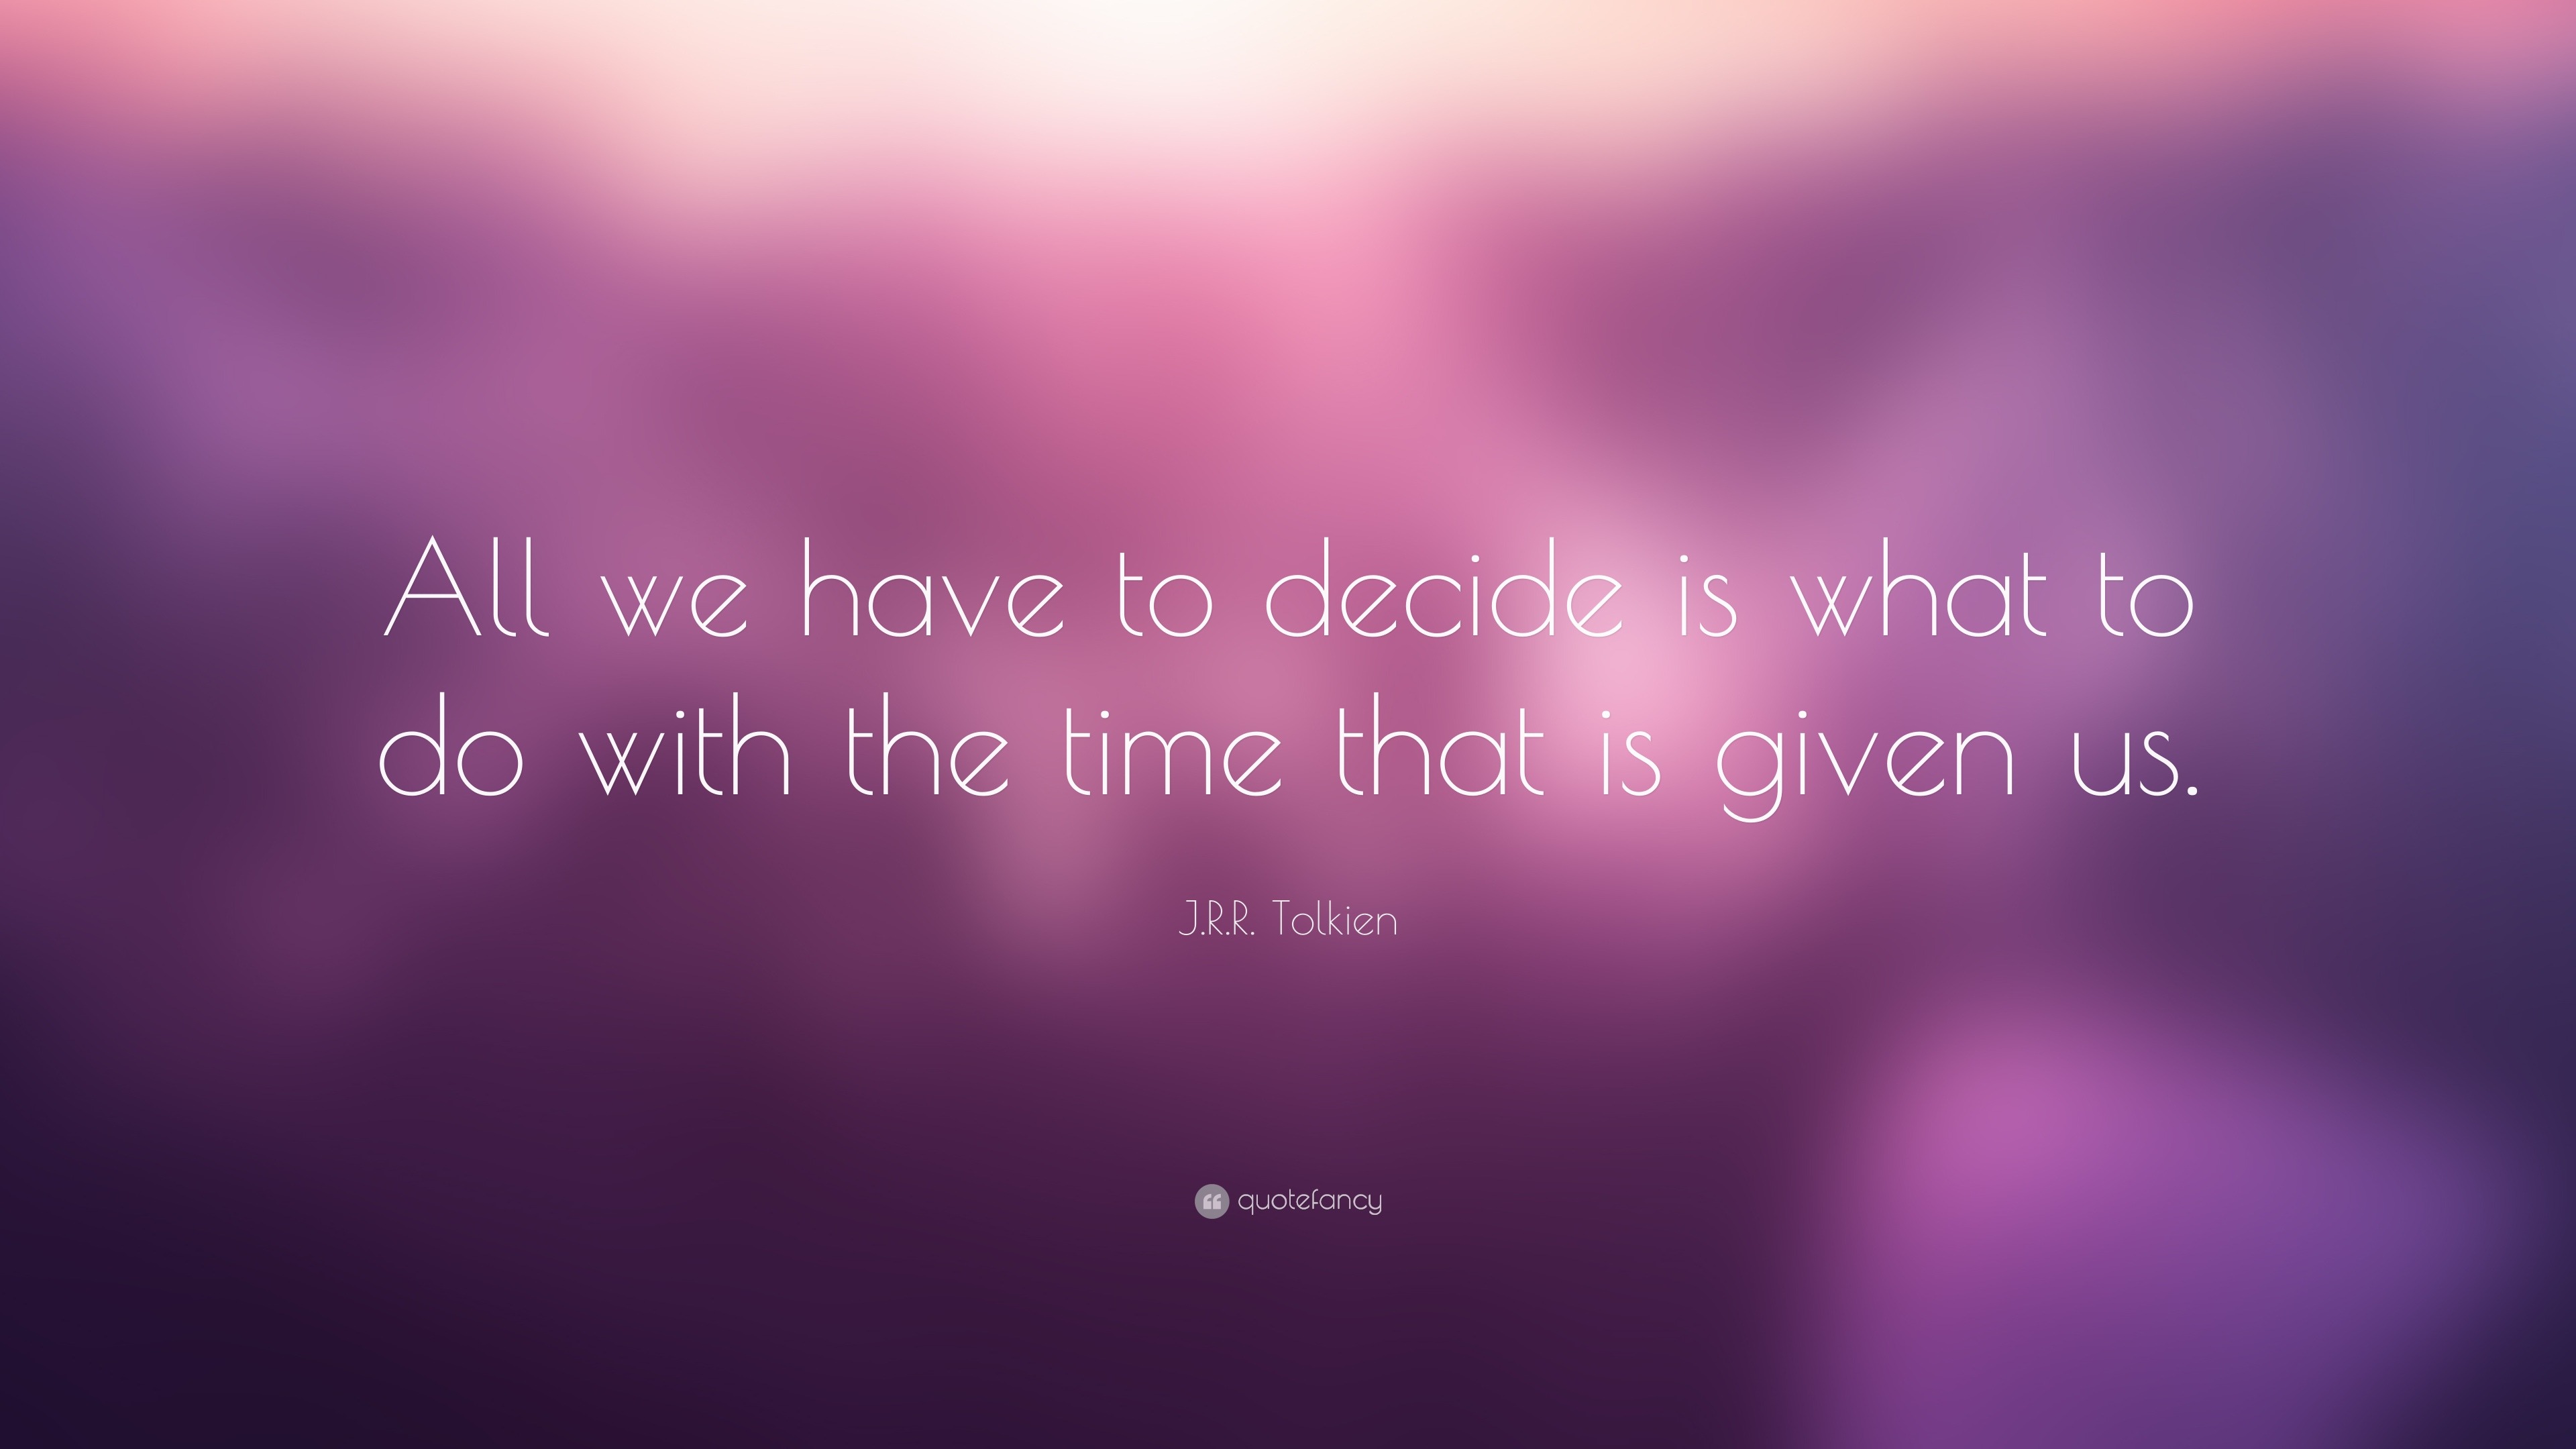 J. R. R. Tolkien Quote: “All we have to decide is what to do with the ...